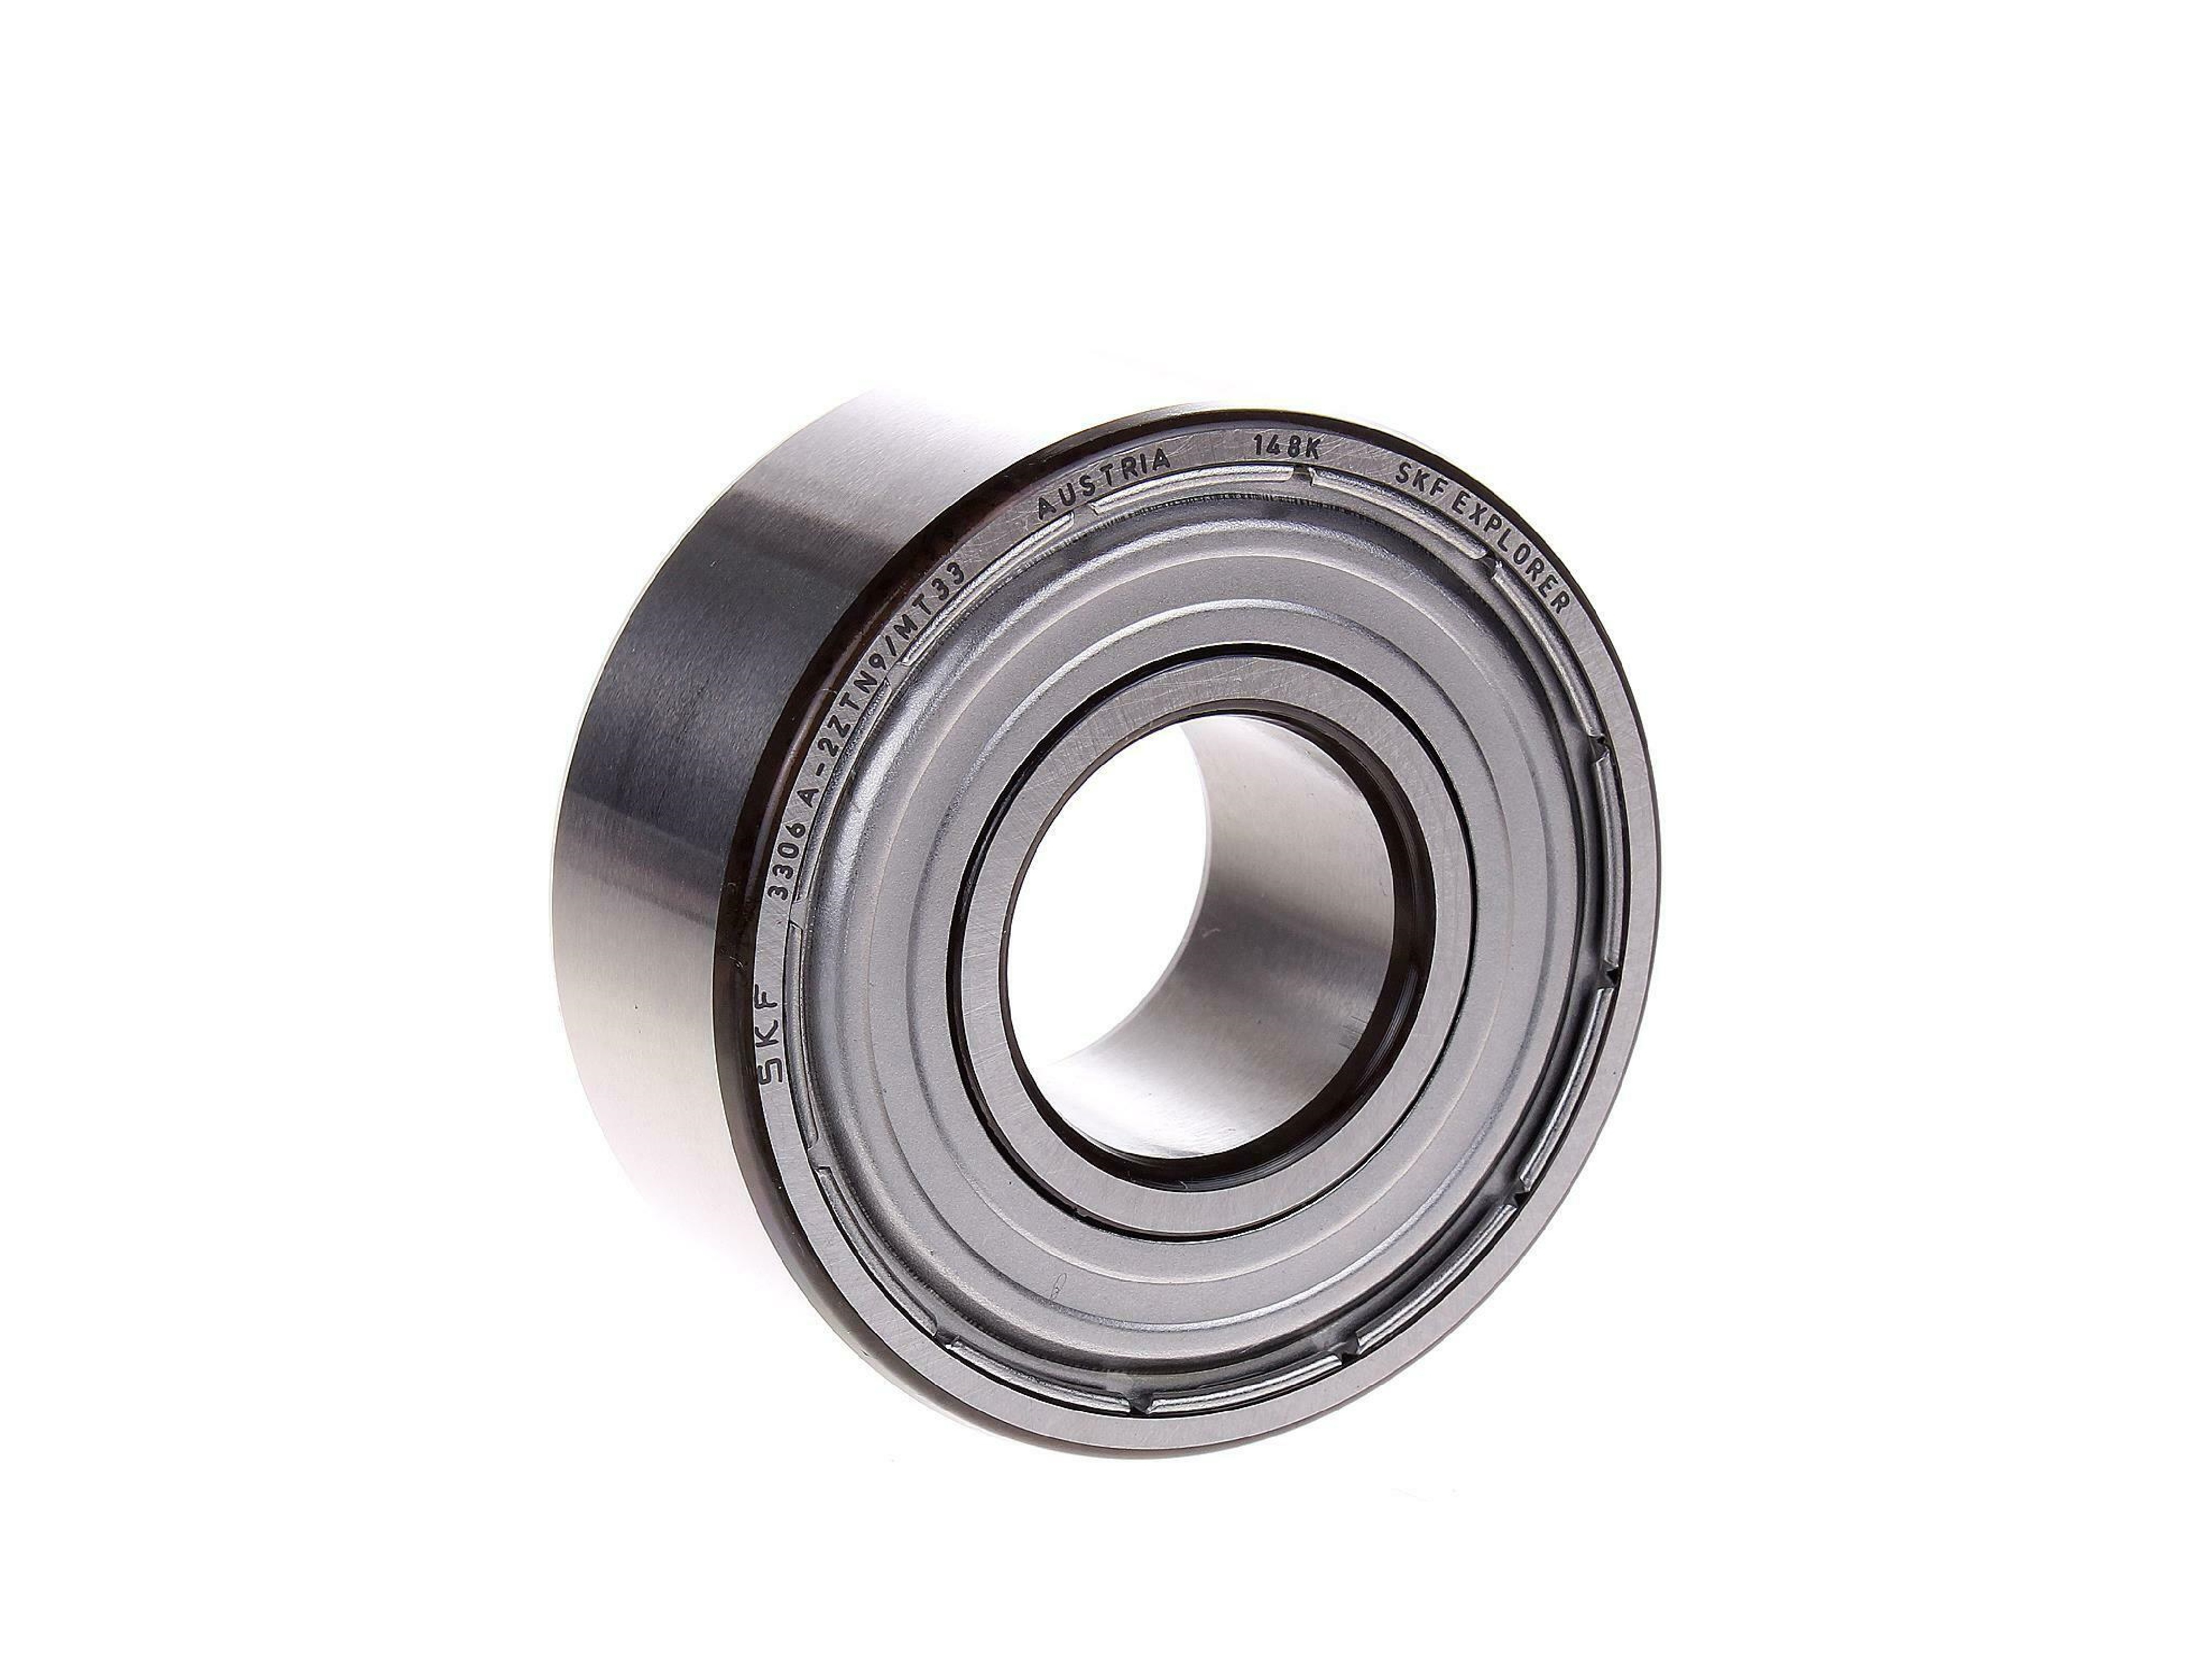 3309A-2Z/C3MT33 SKF Double Row Angular Contact Ball Bearing - Shielded 45mm x 100mm x 39.7mm